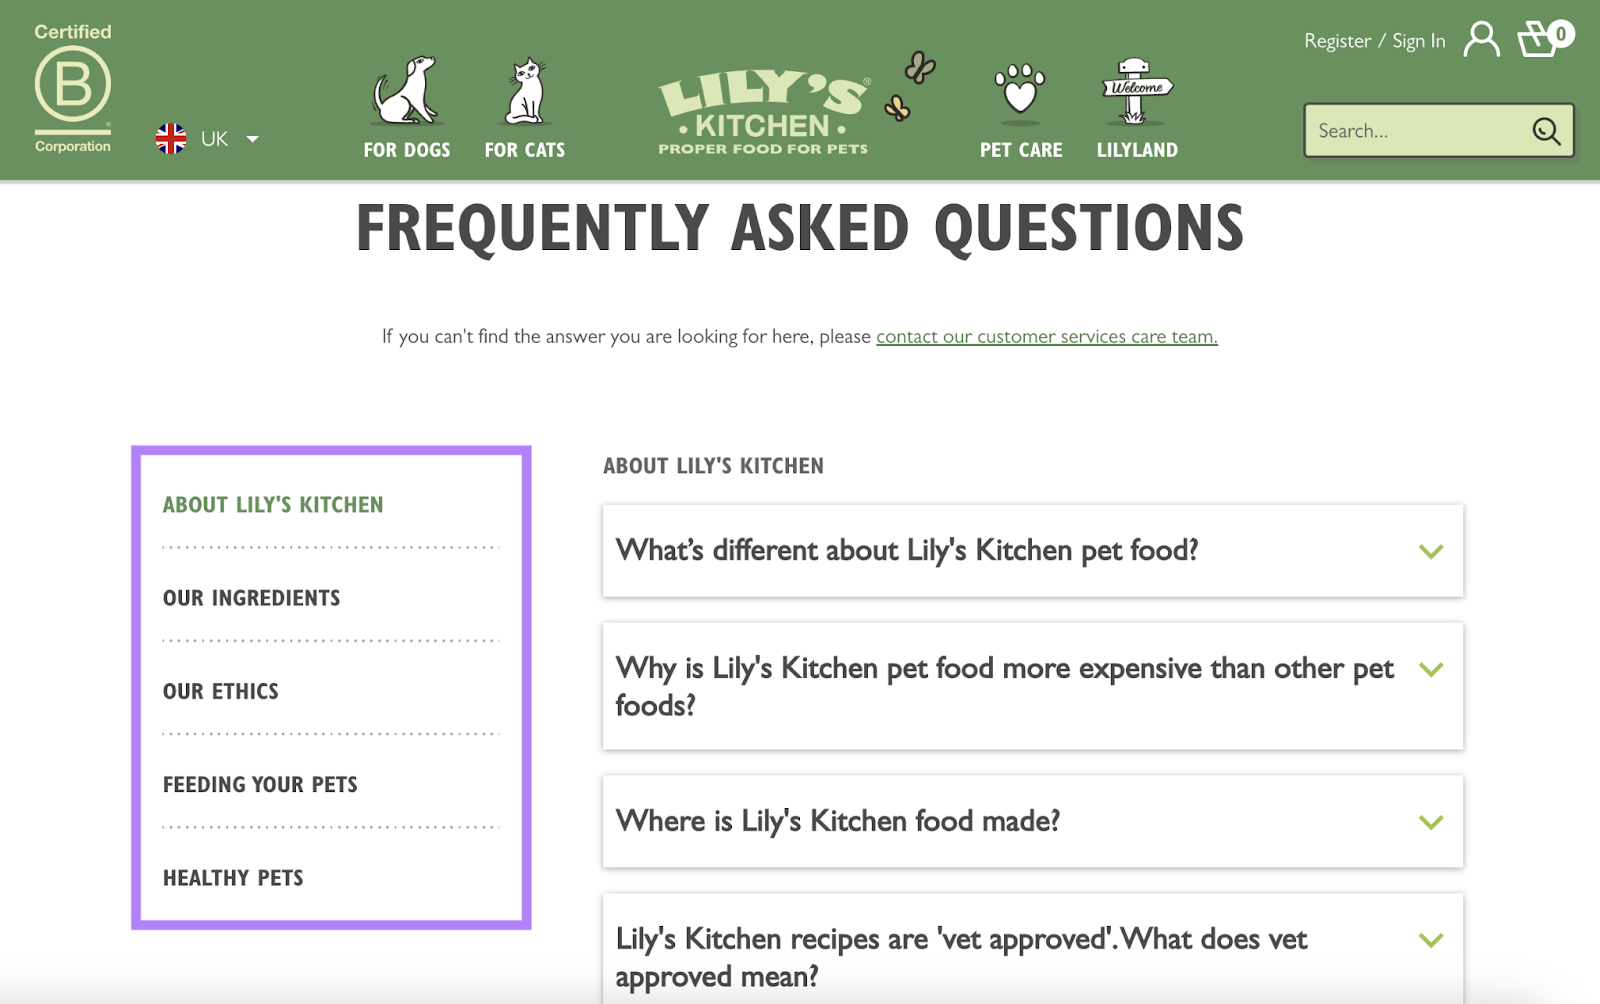 faqs successful  the lefthand navigation assistance   you navigate the afloat  leafage   by taxable   specified  arsenic  ethics, ingredients, and however  to provender  your pets